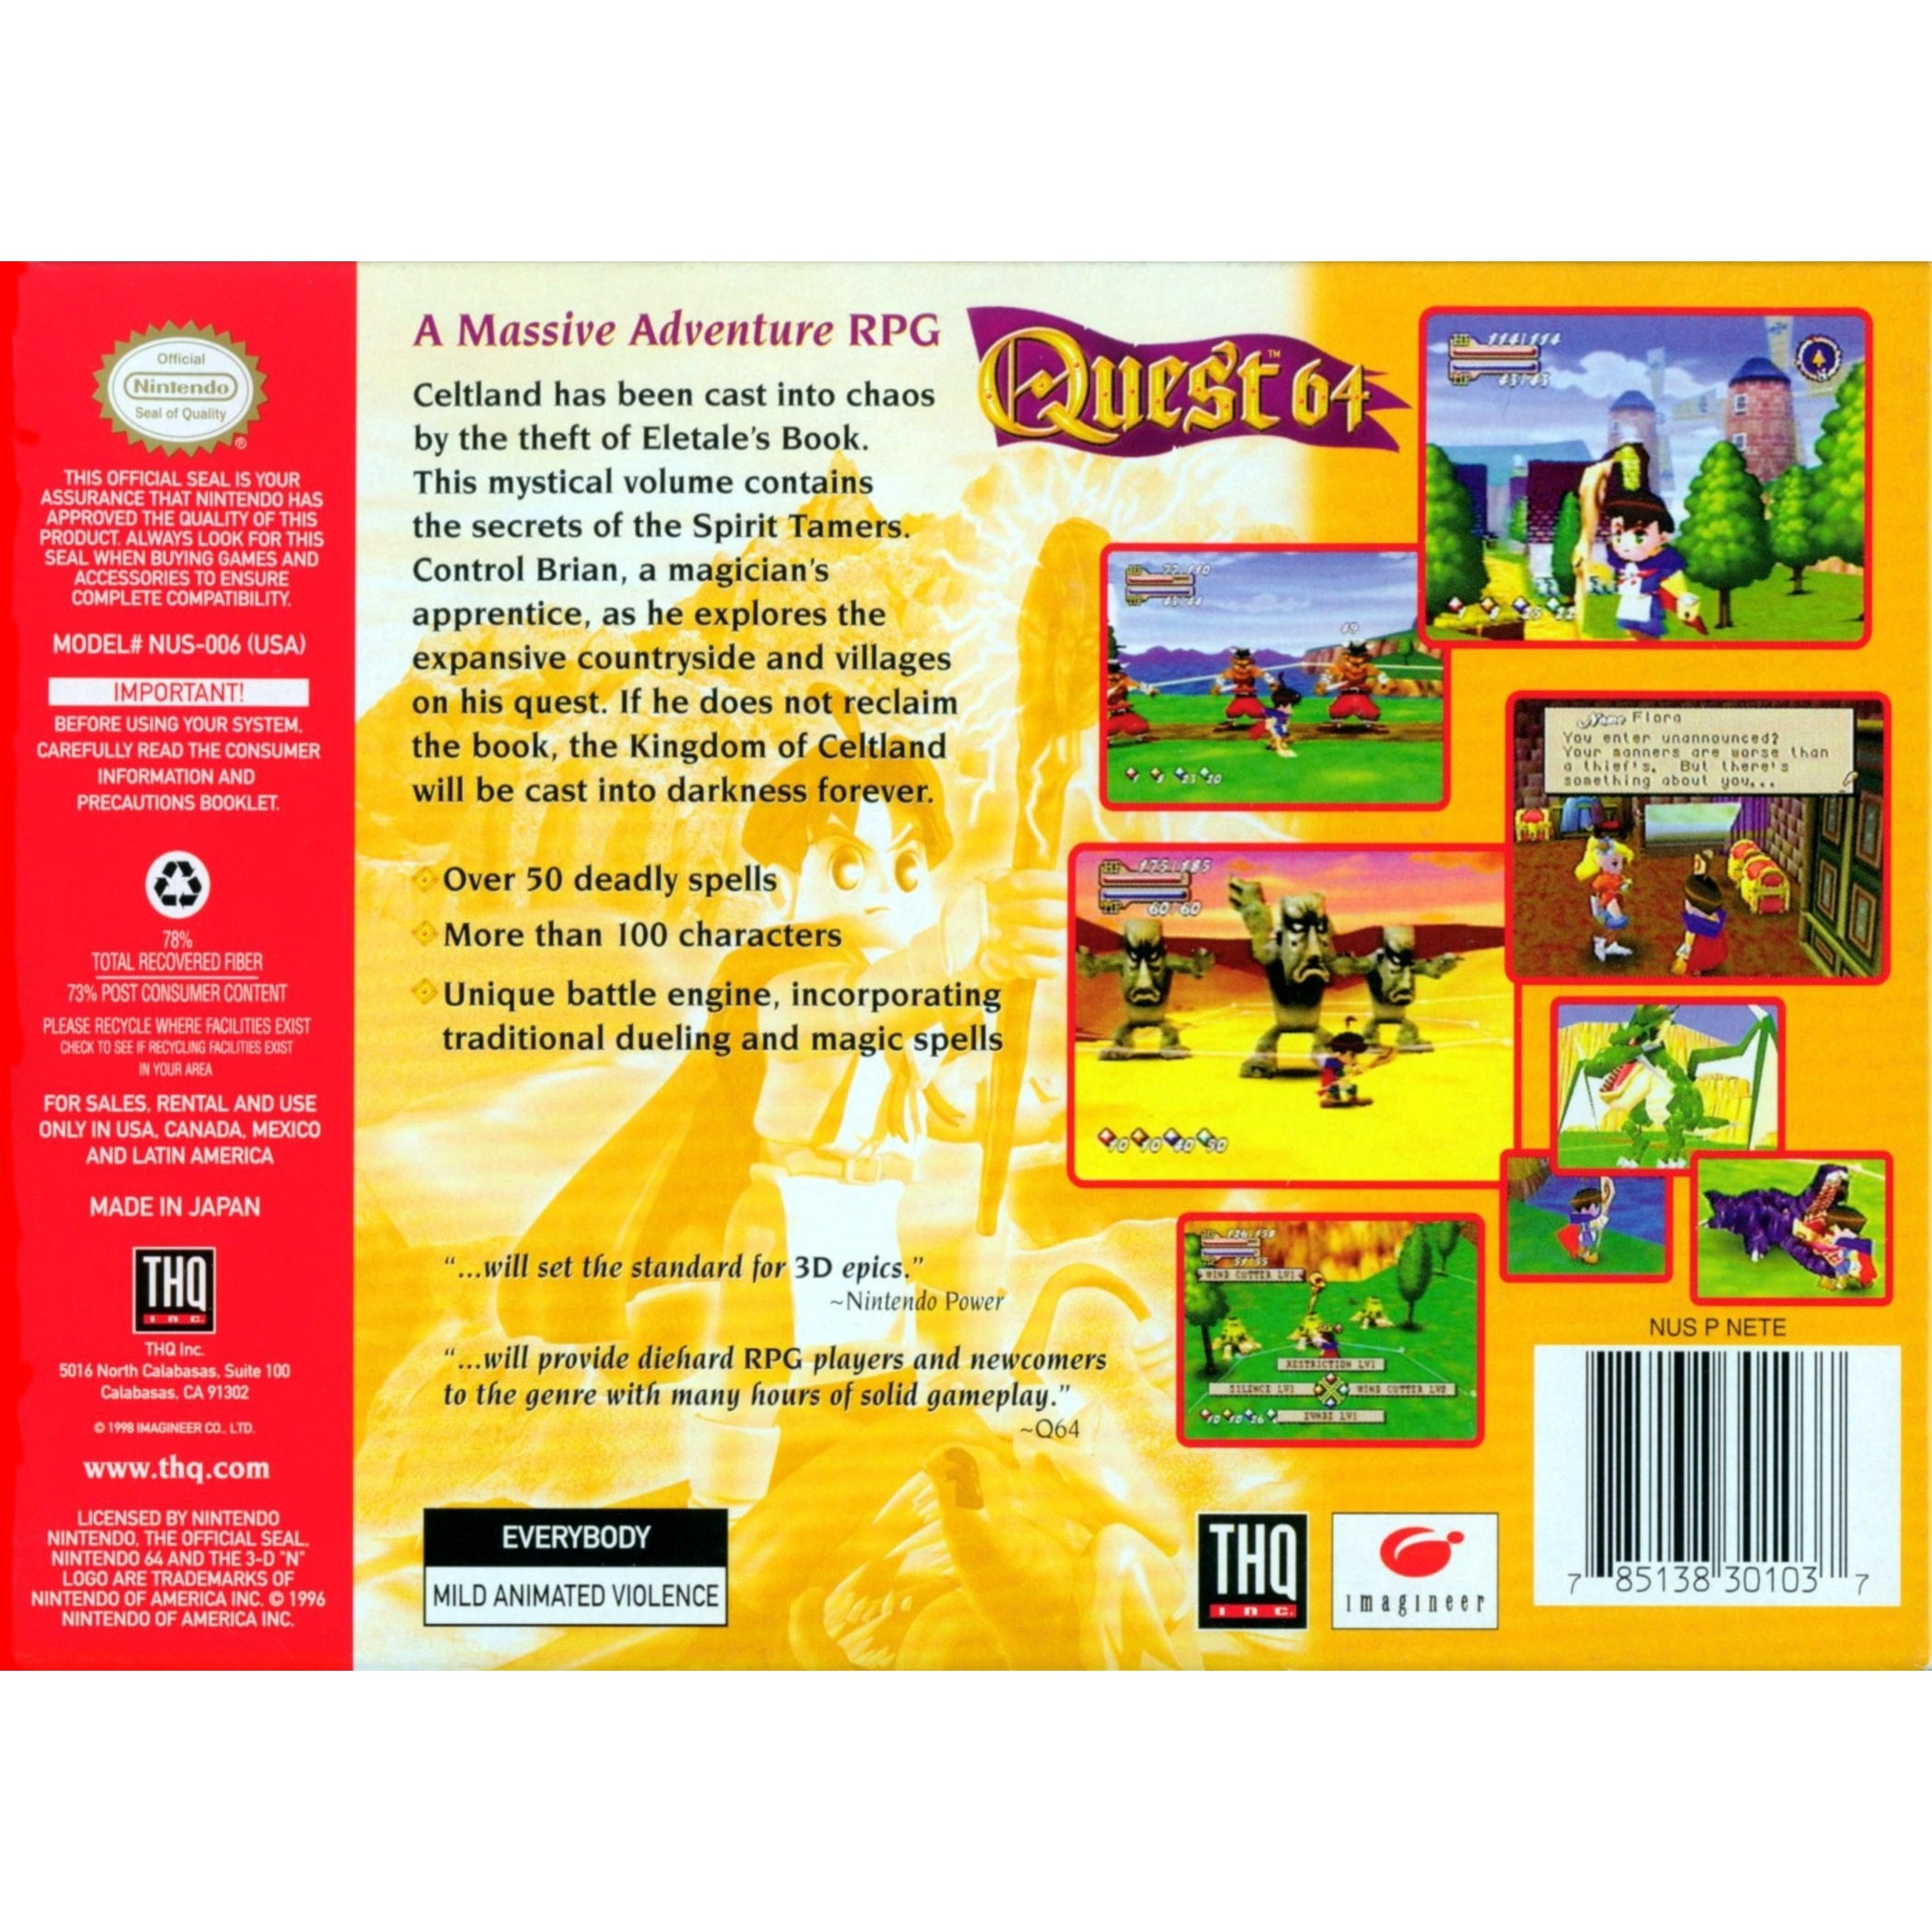 Quest 64 - Authentic Nintendo 64 (N64) Game Cartridge - YourGamingShop.com - Buy, Sell, Trade Video Games Online. 120 Day Warranty. Satisfaction Guaranteed.